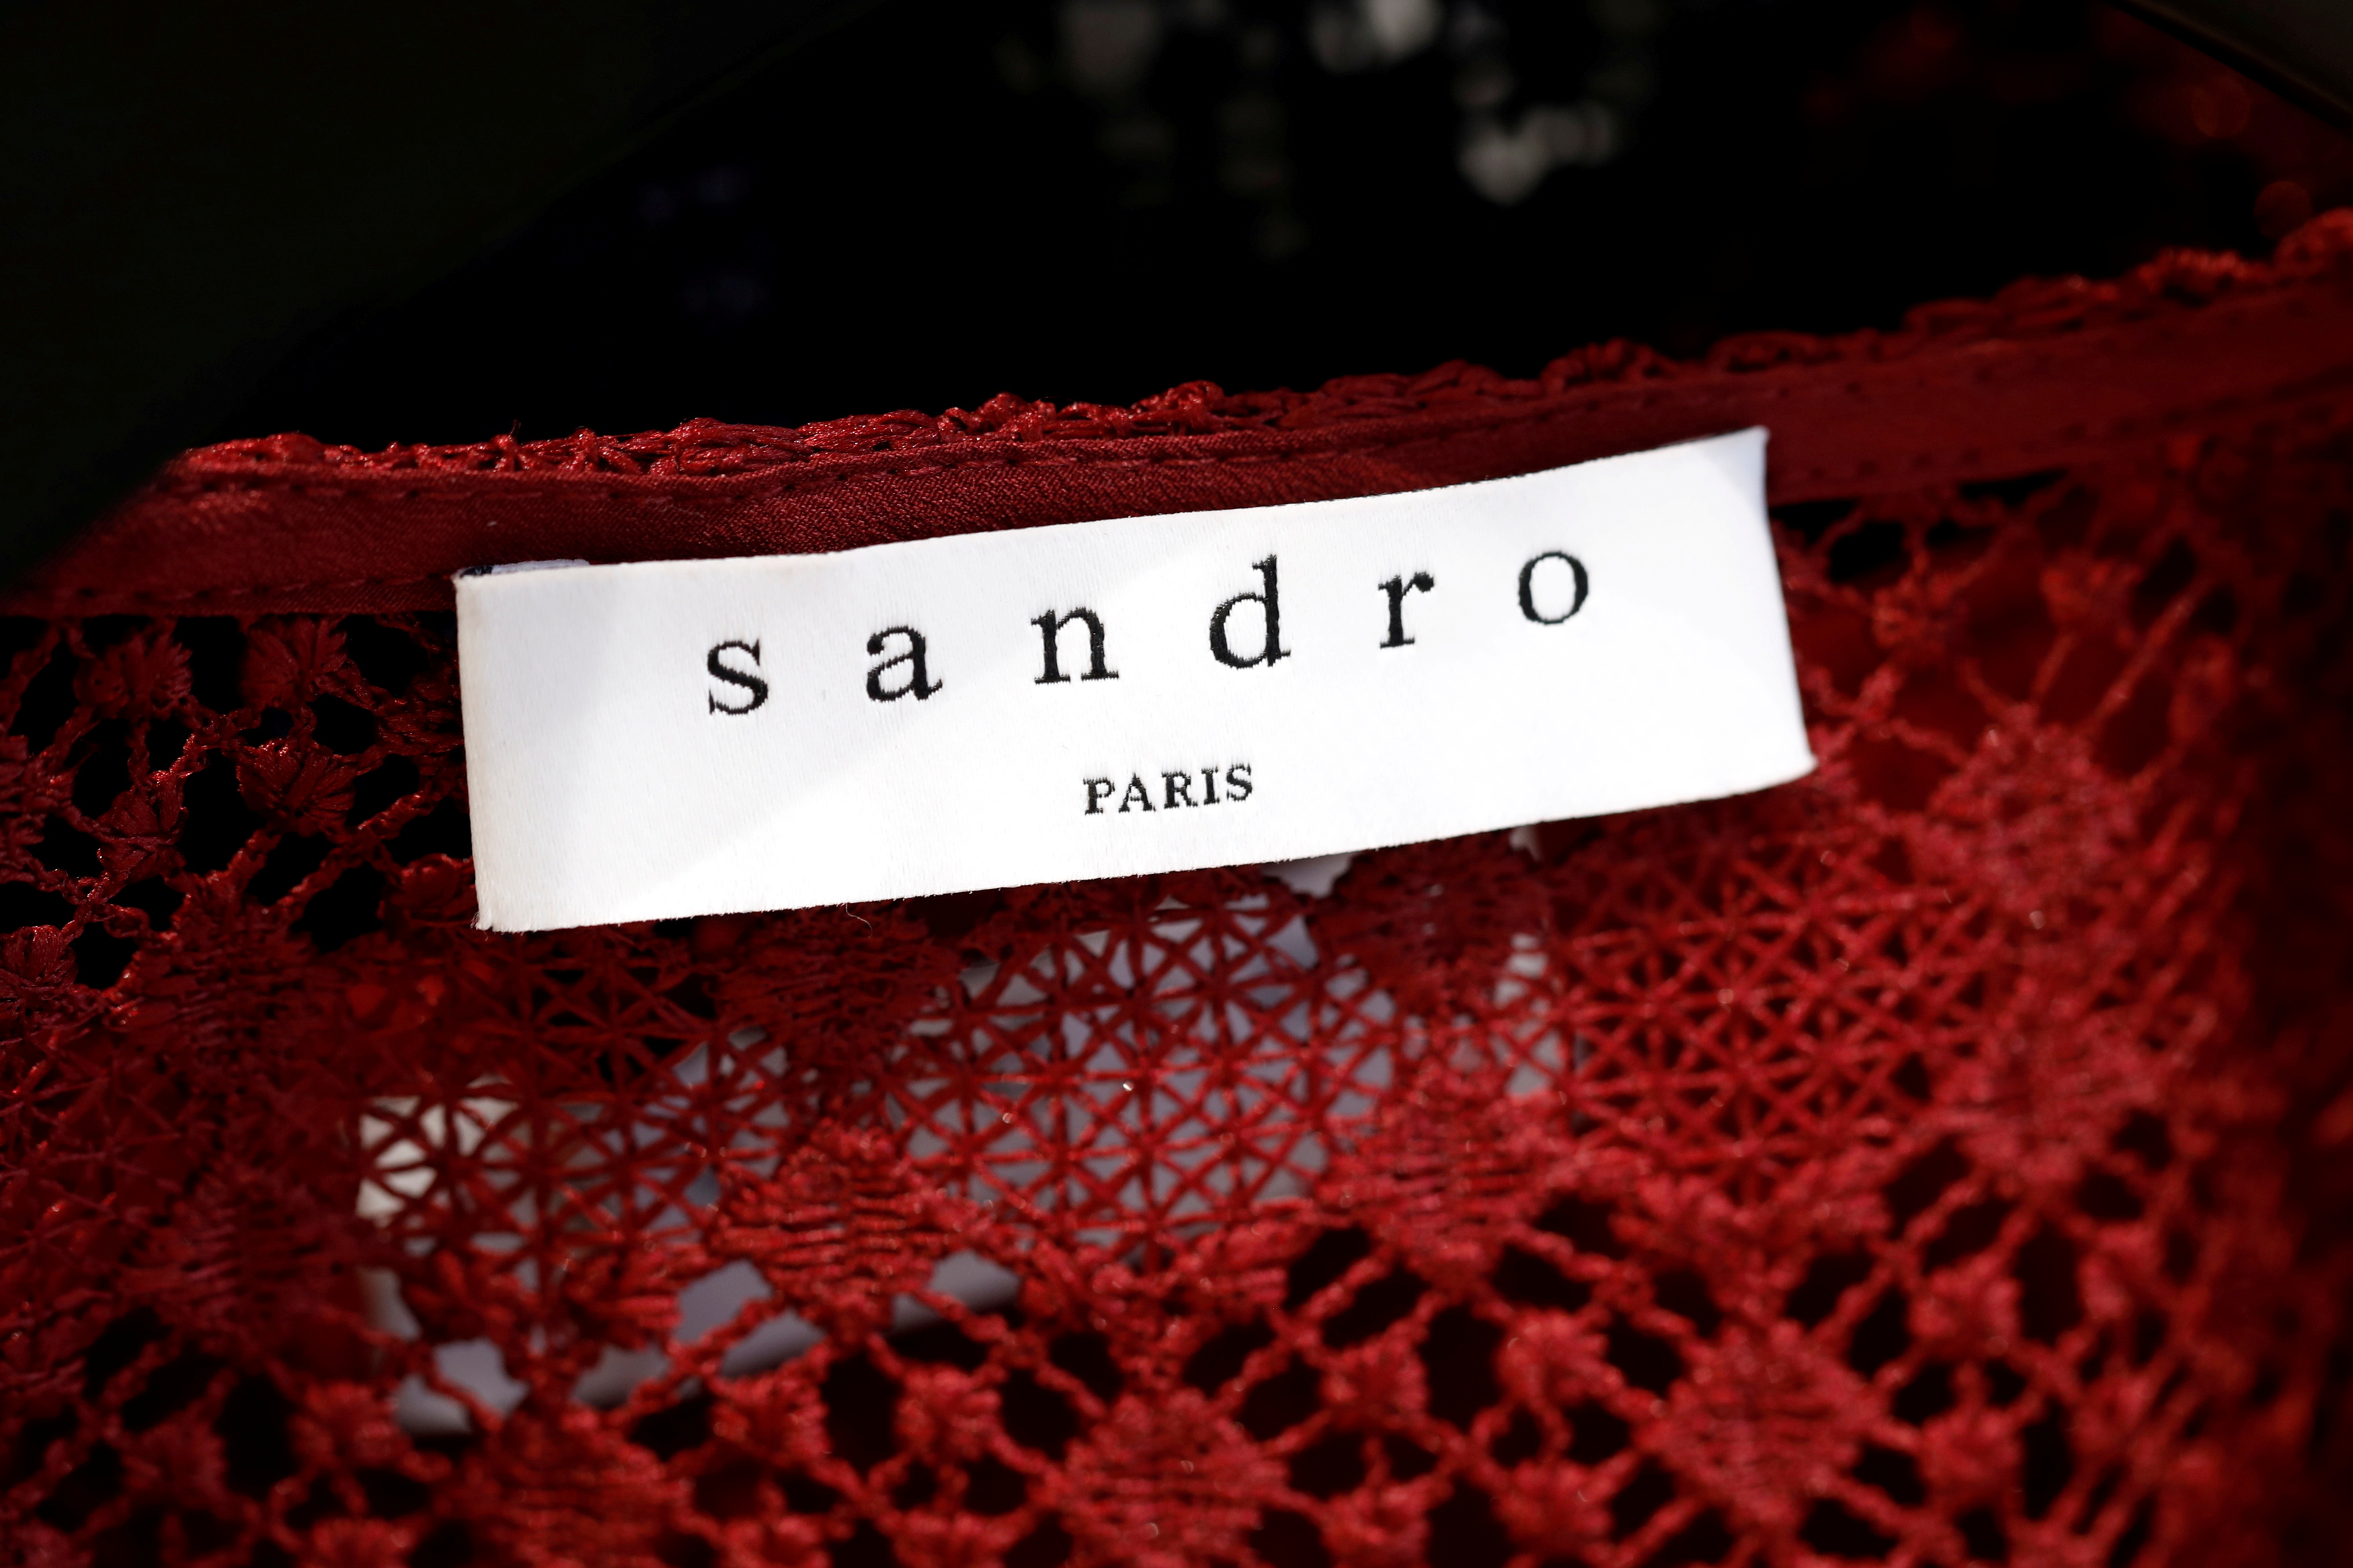 A Sandro label is pictured on clothes inside a Sandro luxury clothing store, operated by SMCP Group, in Paris, France, December 21, 2017. REUTERS/Benoit Tessier